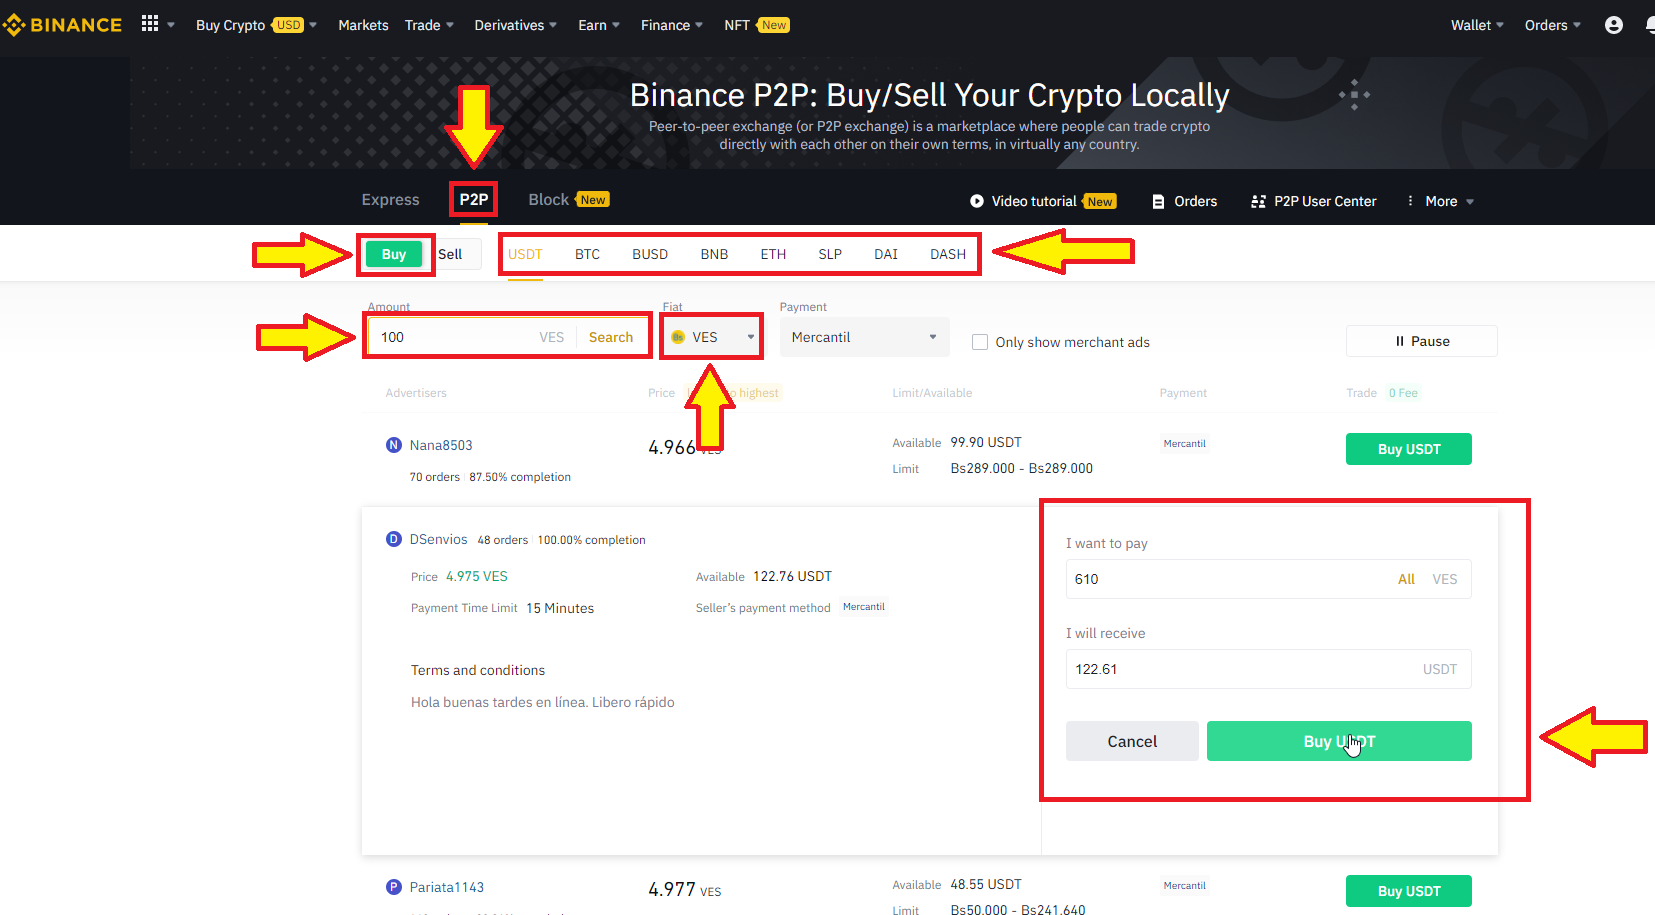 Buy OpenOcean crypto in P2P with a verified account on Binance